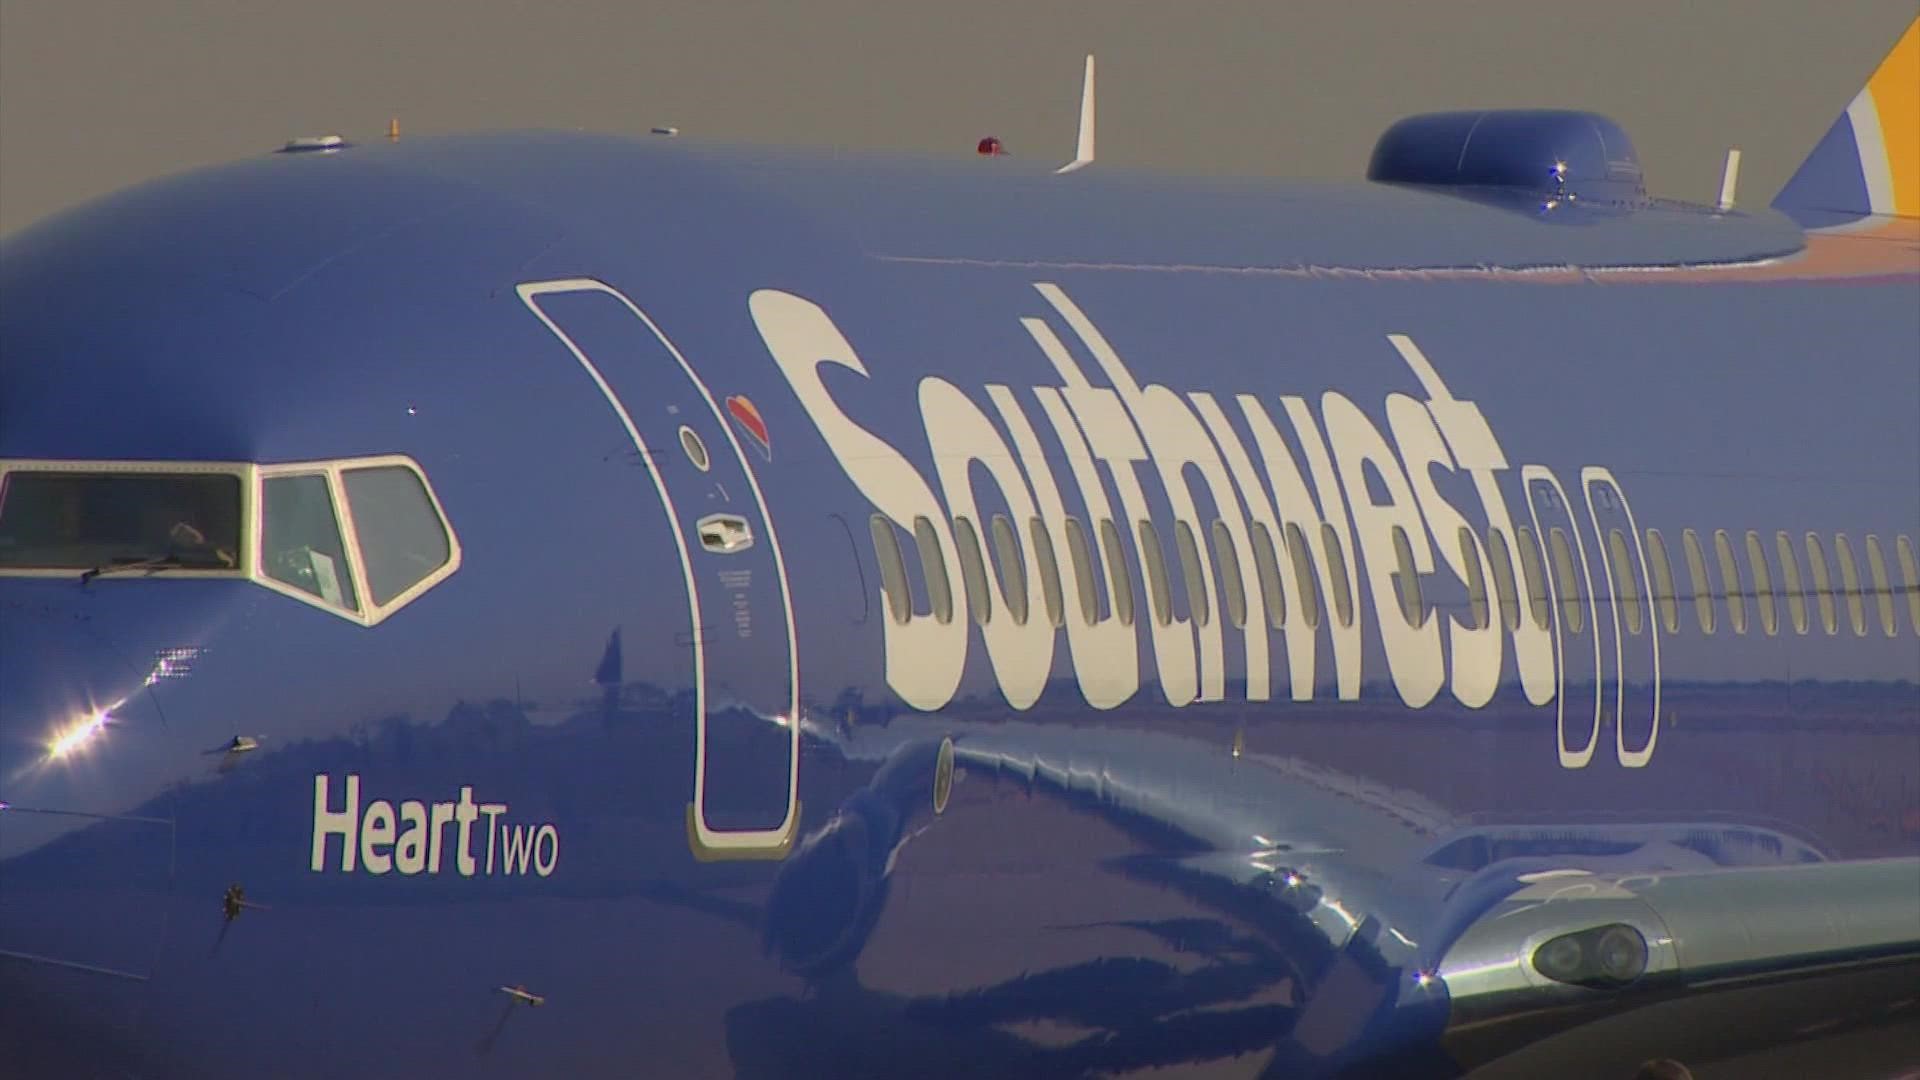 An arrest affidavit states the Southwest Airlines employee was knocked unconscious. She has since been released from the hospital.